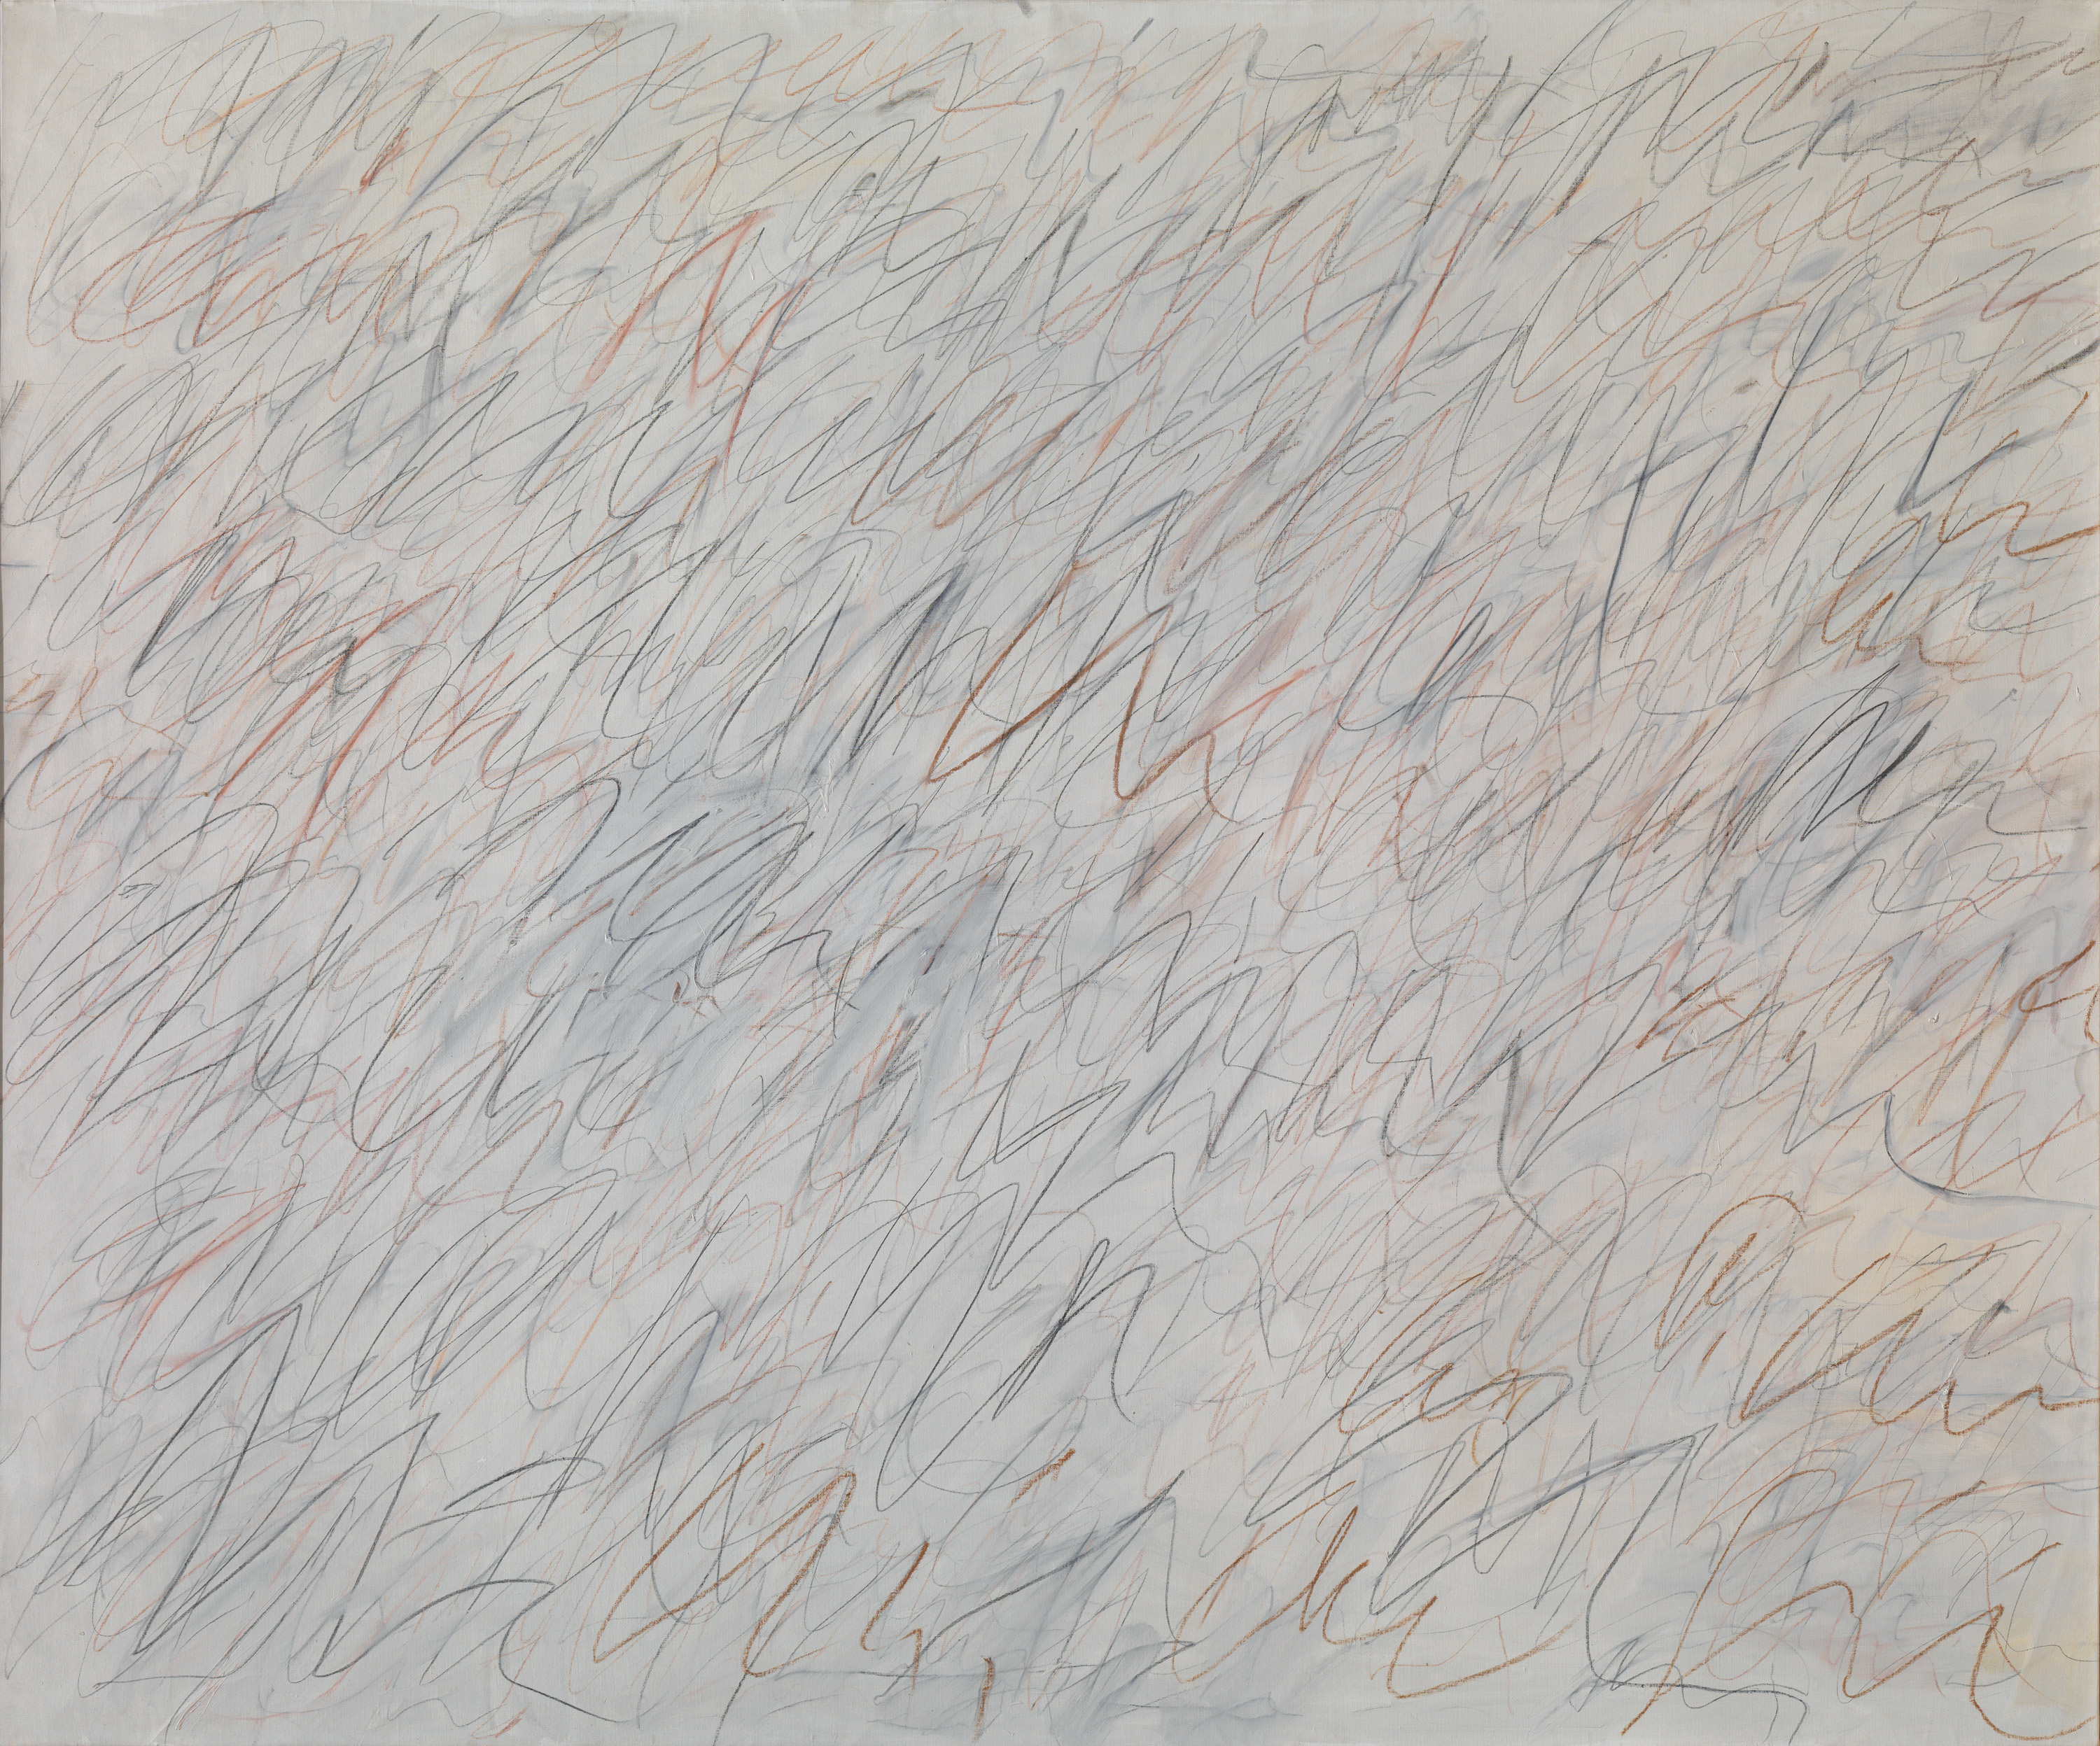 Cy Twombly – Nini's Painting